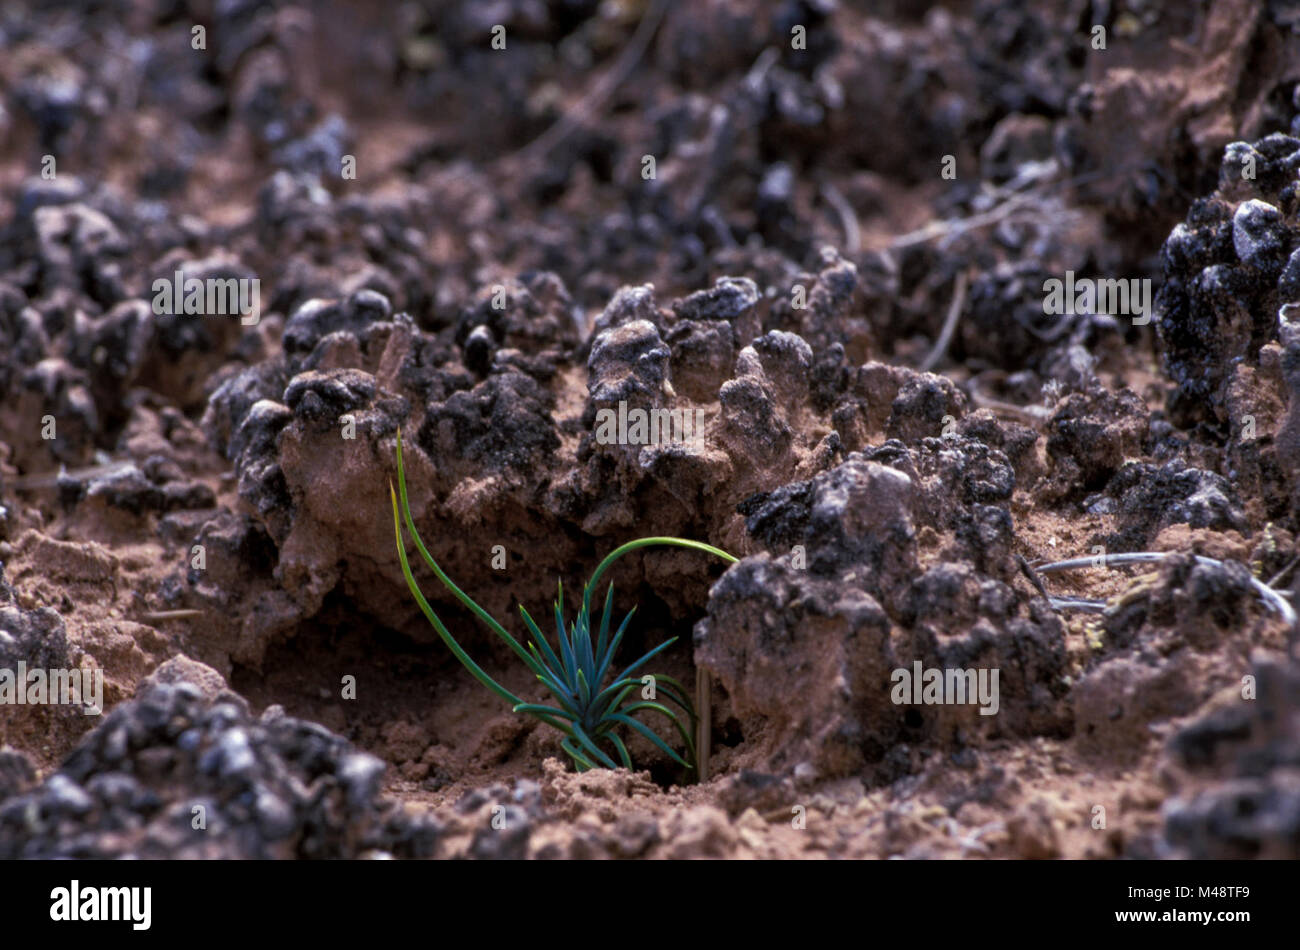 Sheltered from wind & rain, a seedling takes root in. Stock Photo